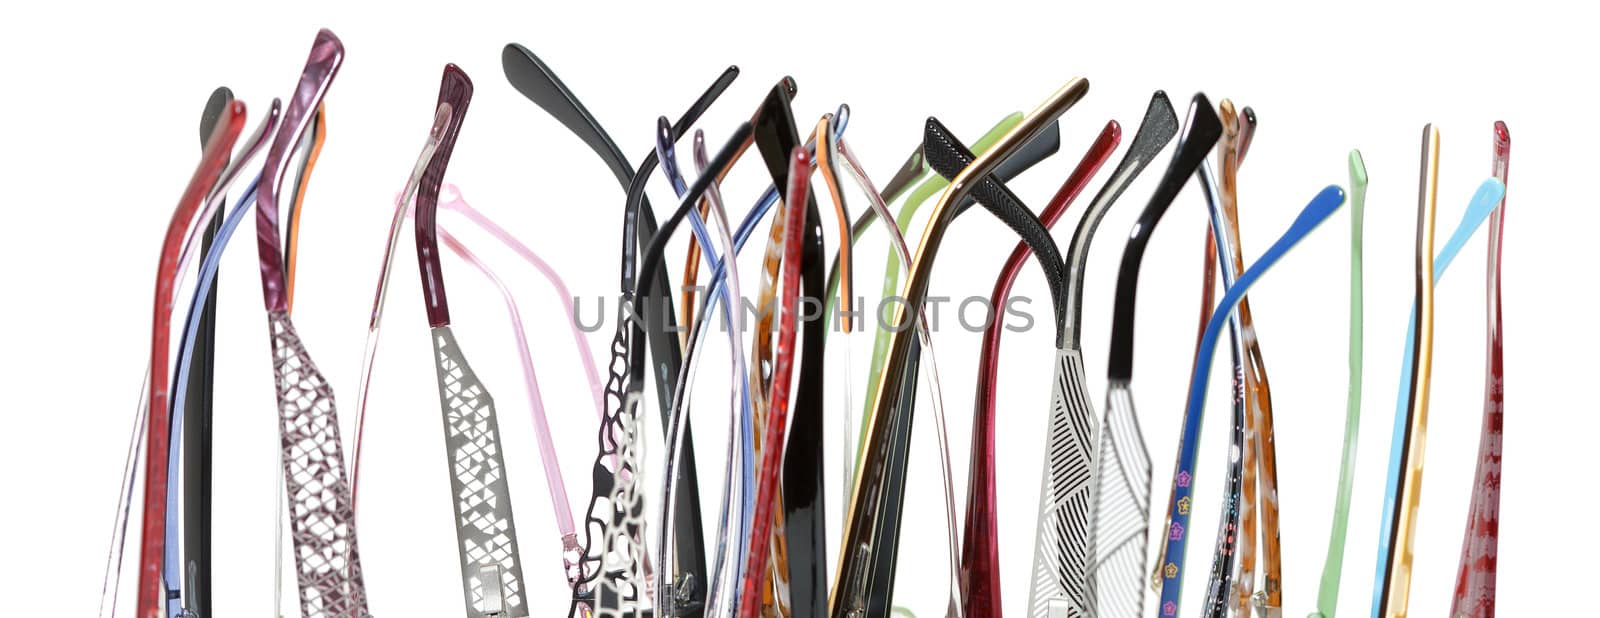 a lot of earpiece glasses on white background